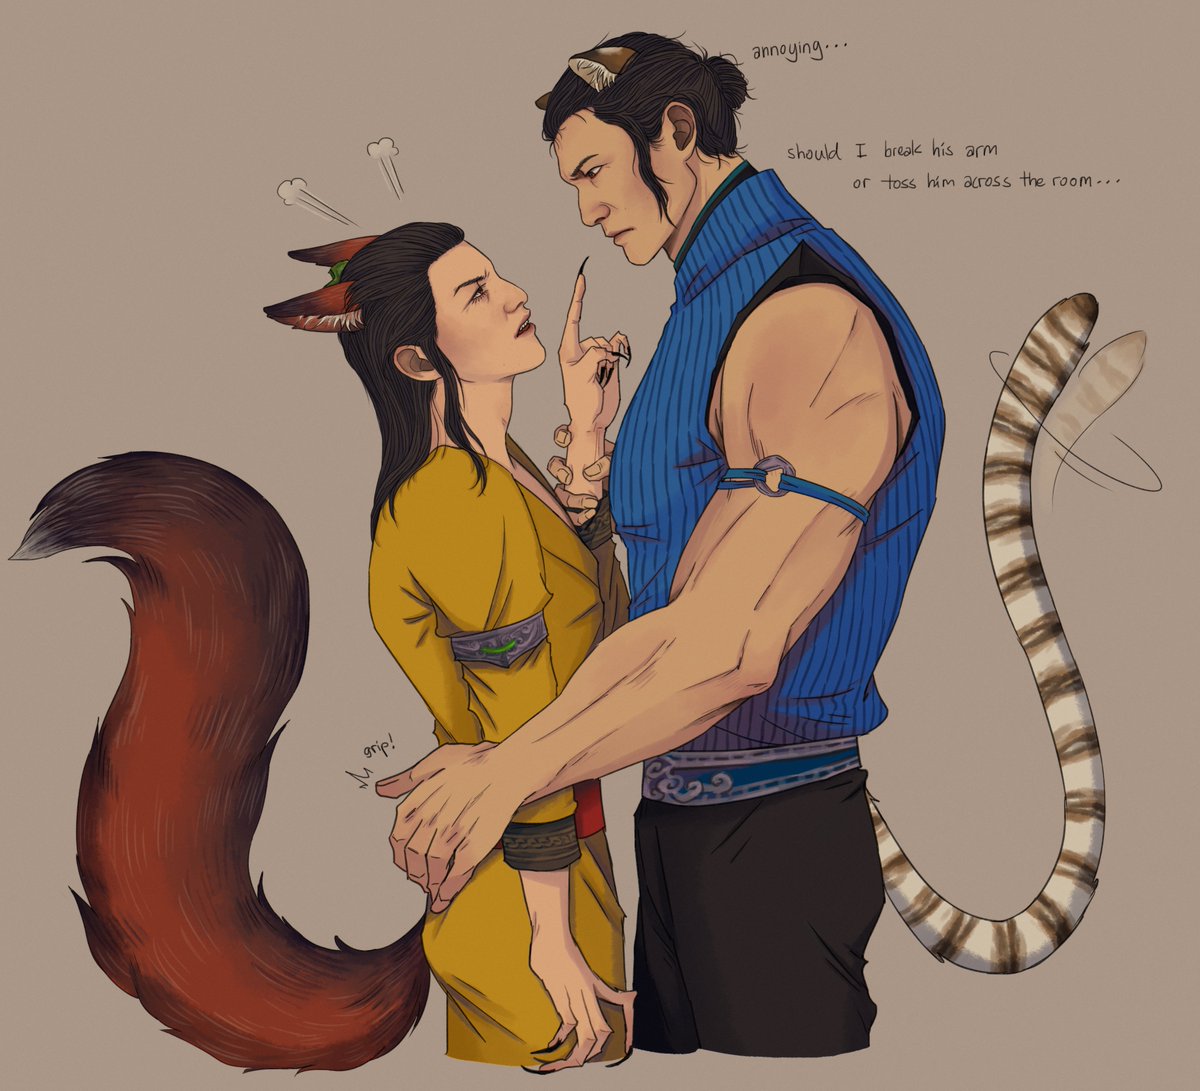 Shang Tsung's angy because BiHan moved something in his (messy ass) room that he can't find anymore

#bishang